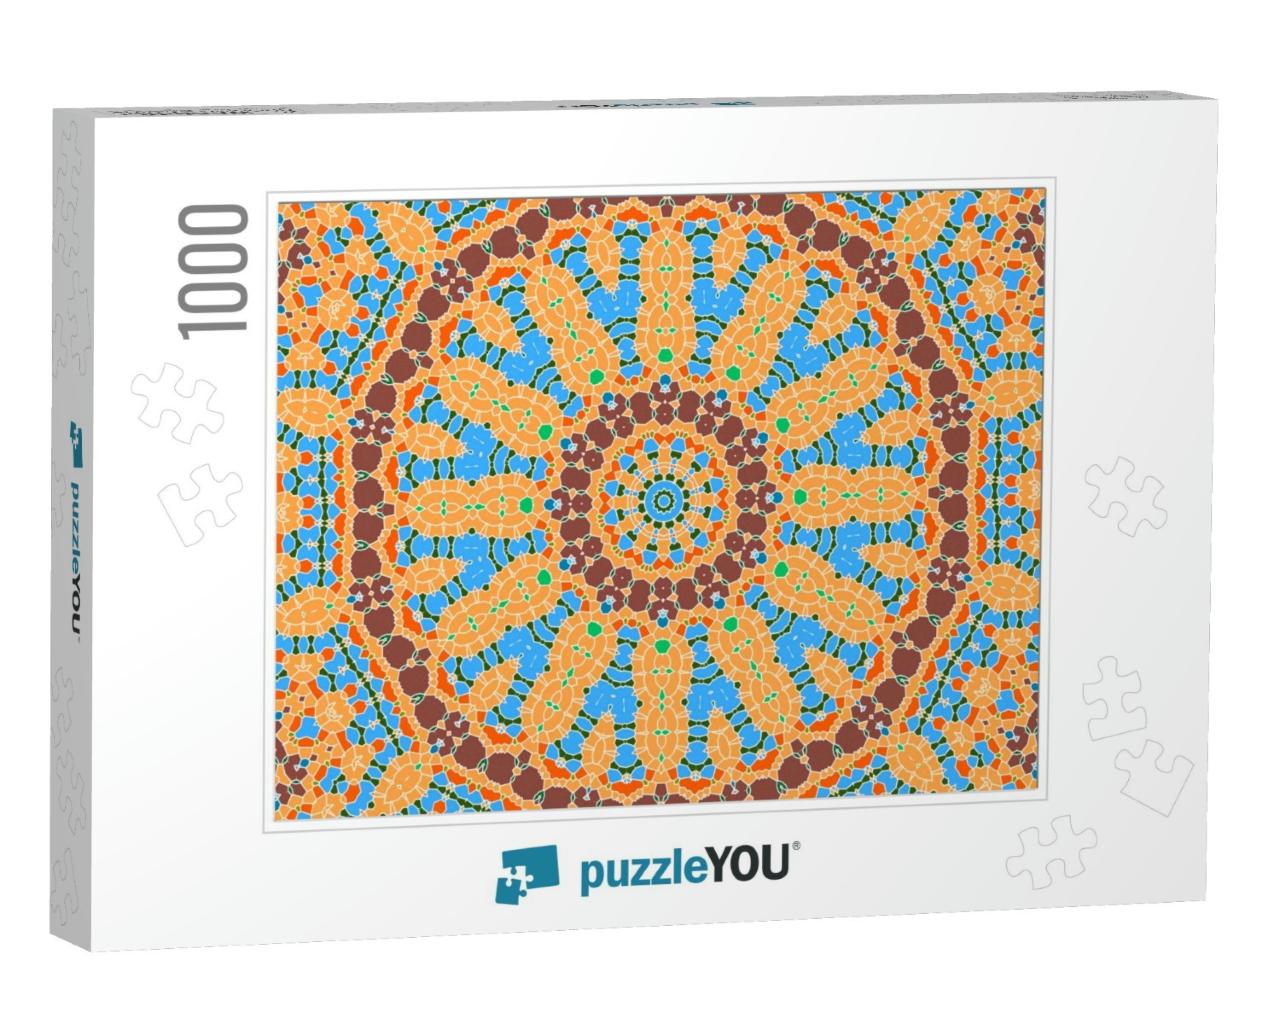 Geometric Ornament. Decorative Mosaic Texture. Abstract B... Jigsaw Puzzle with 1000 pieces